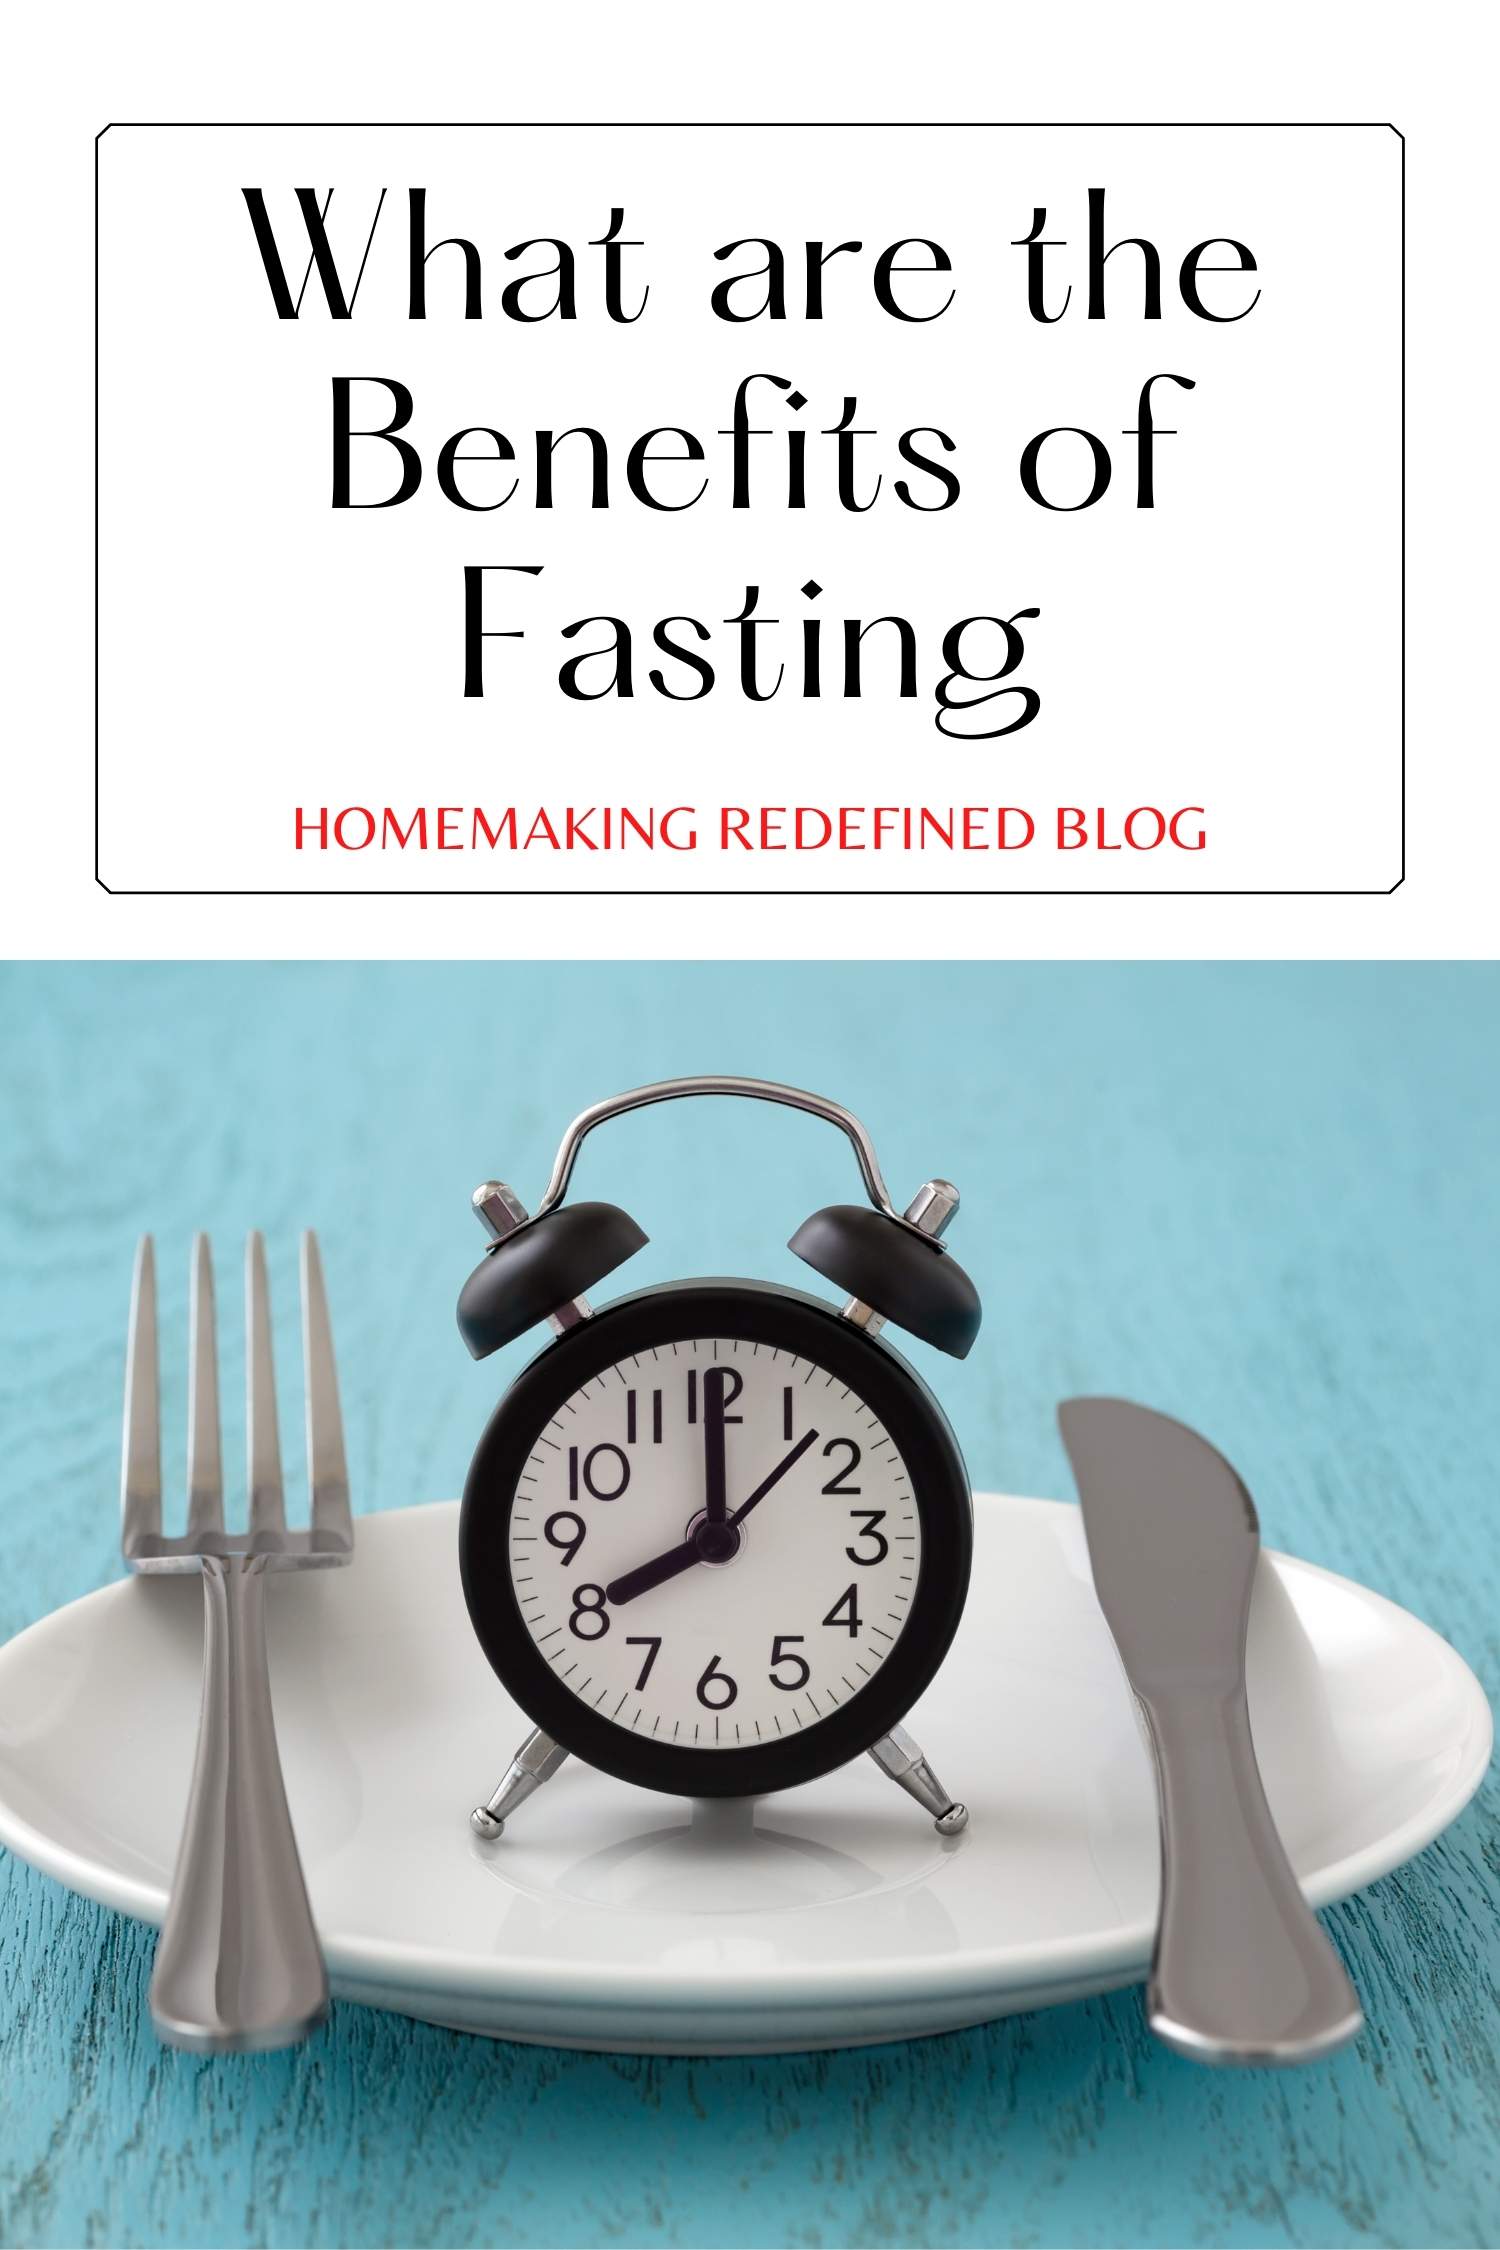 What are the Benefits of Fasting - Homemaking Redefined